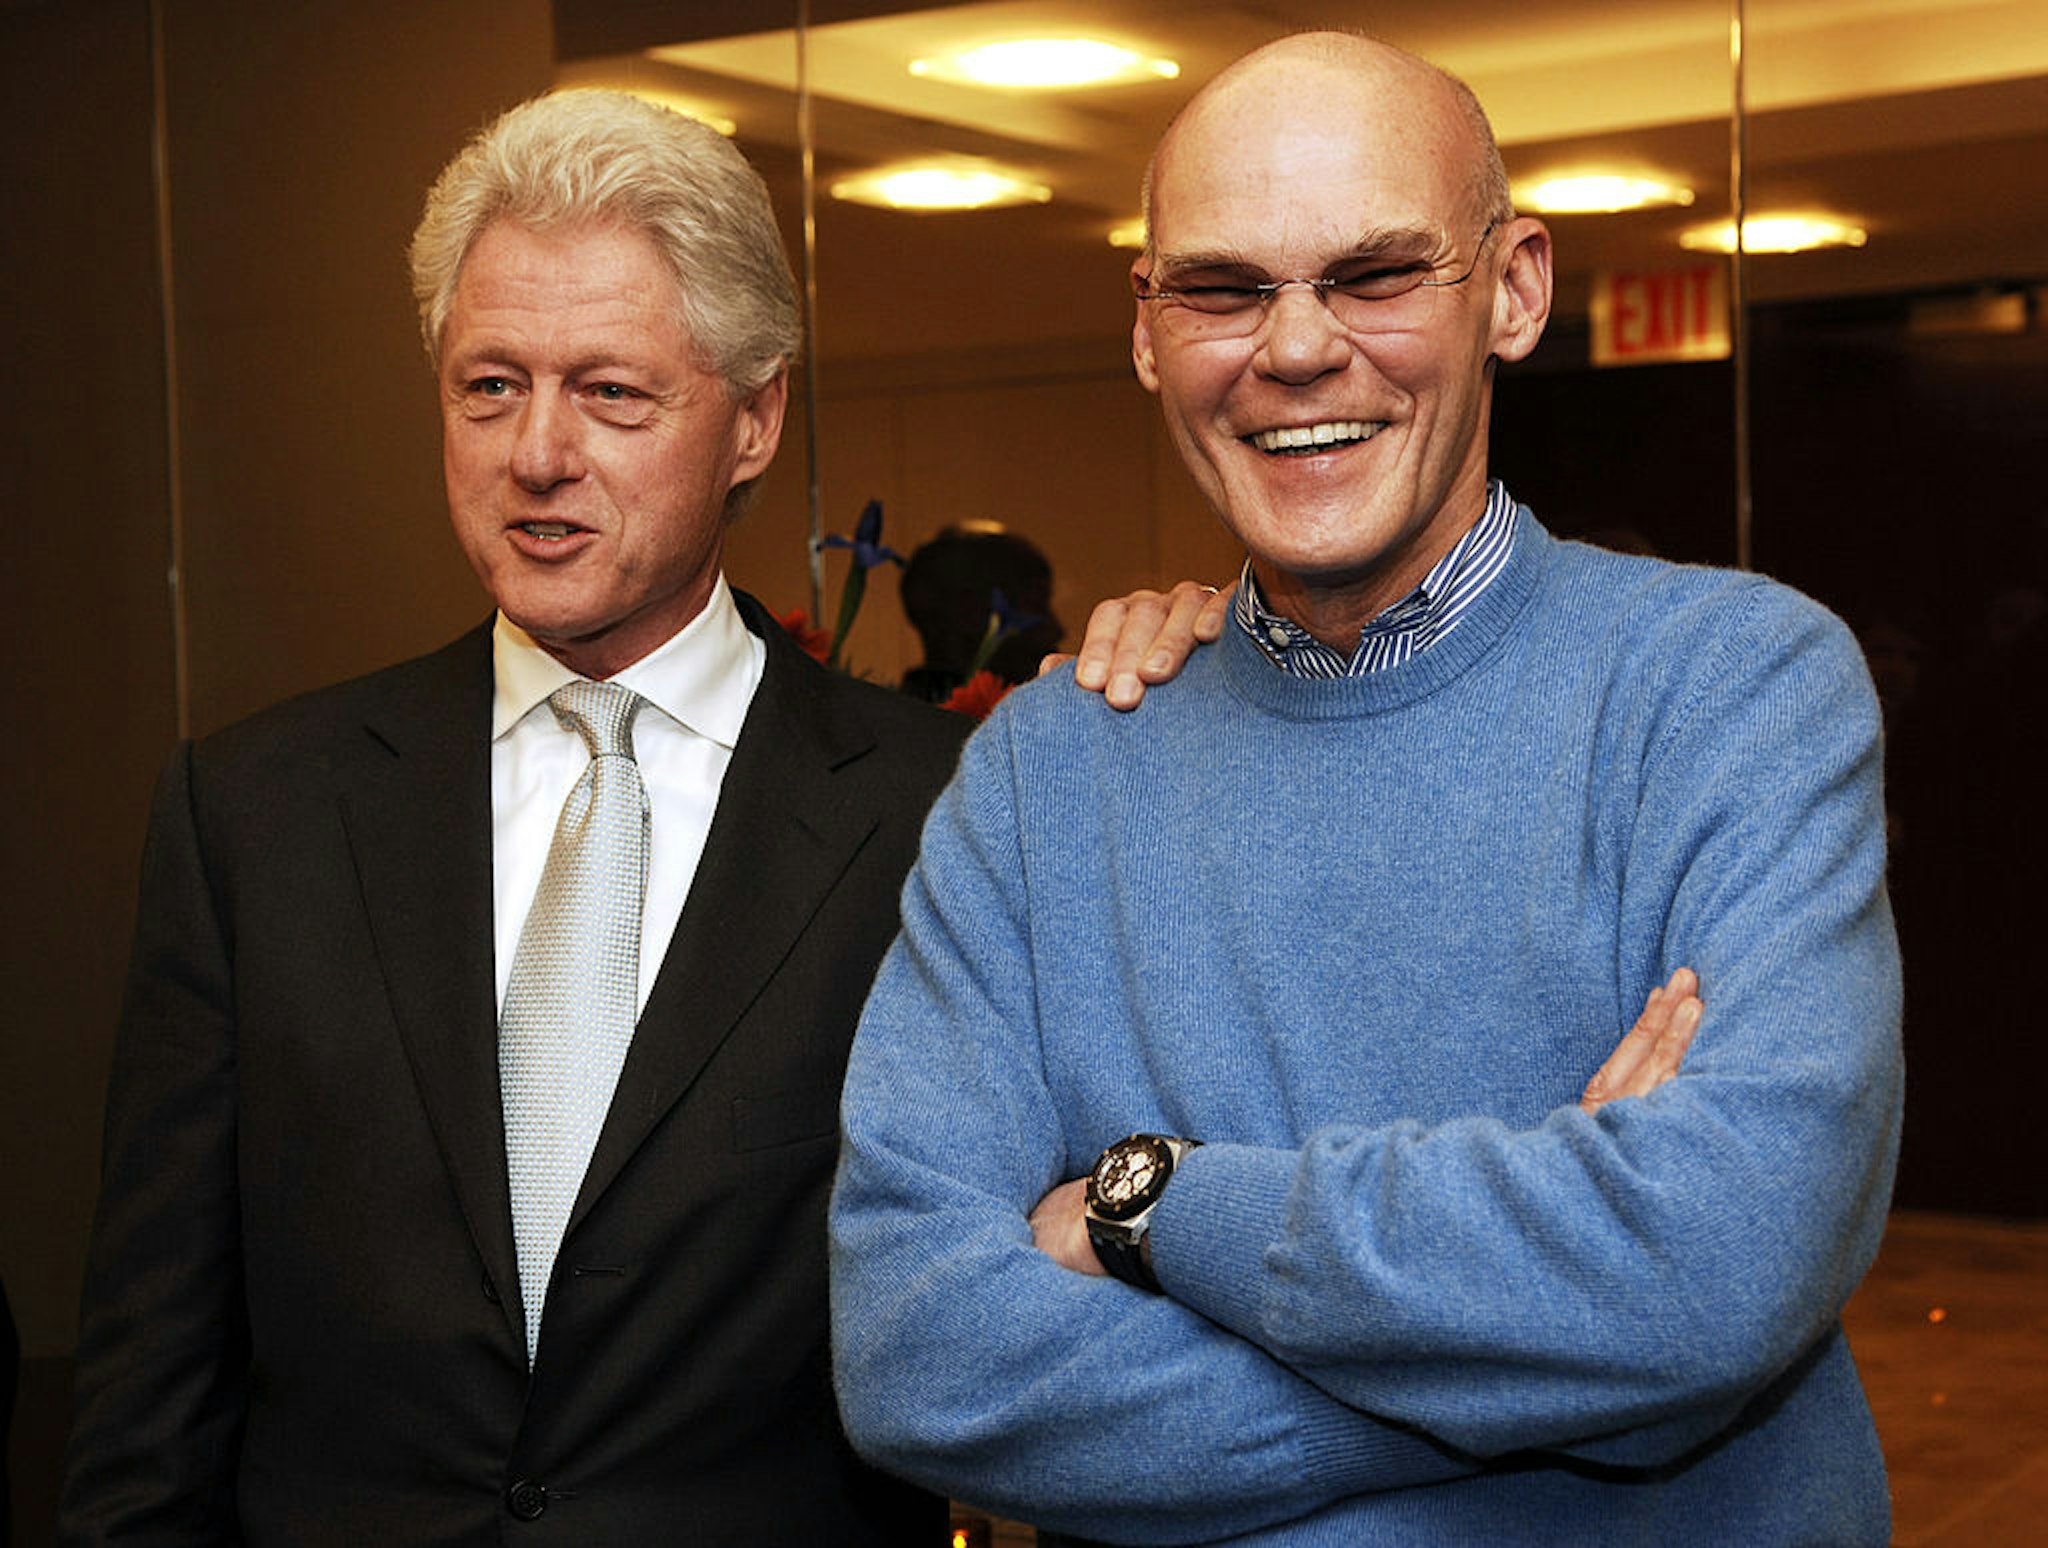 Former President Bill Clinton and James Carville during Former President Bill Clinton Hosts a Book Party for James Carville and Paul Begala's New Book "Take It Back" at 55 West 125th St. in New York, New York, United States. (Photo by